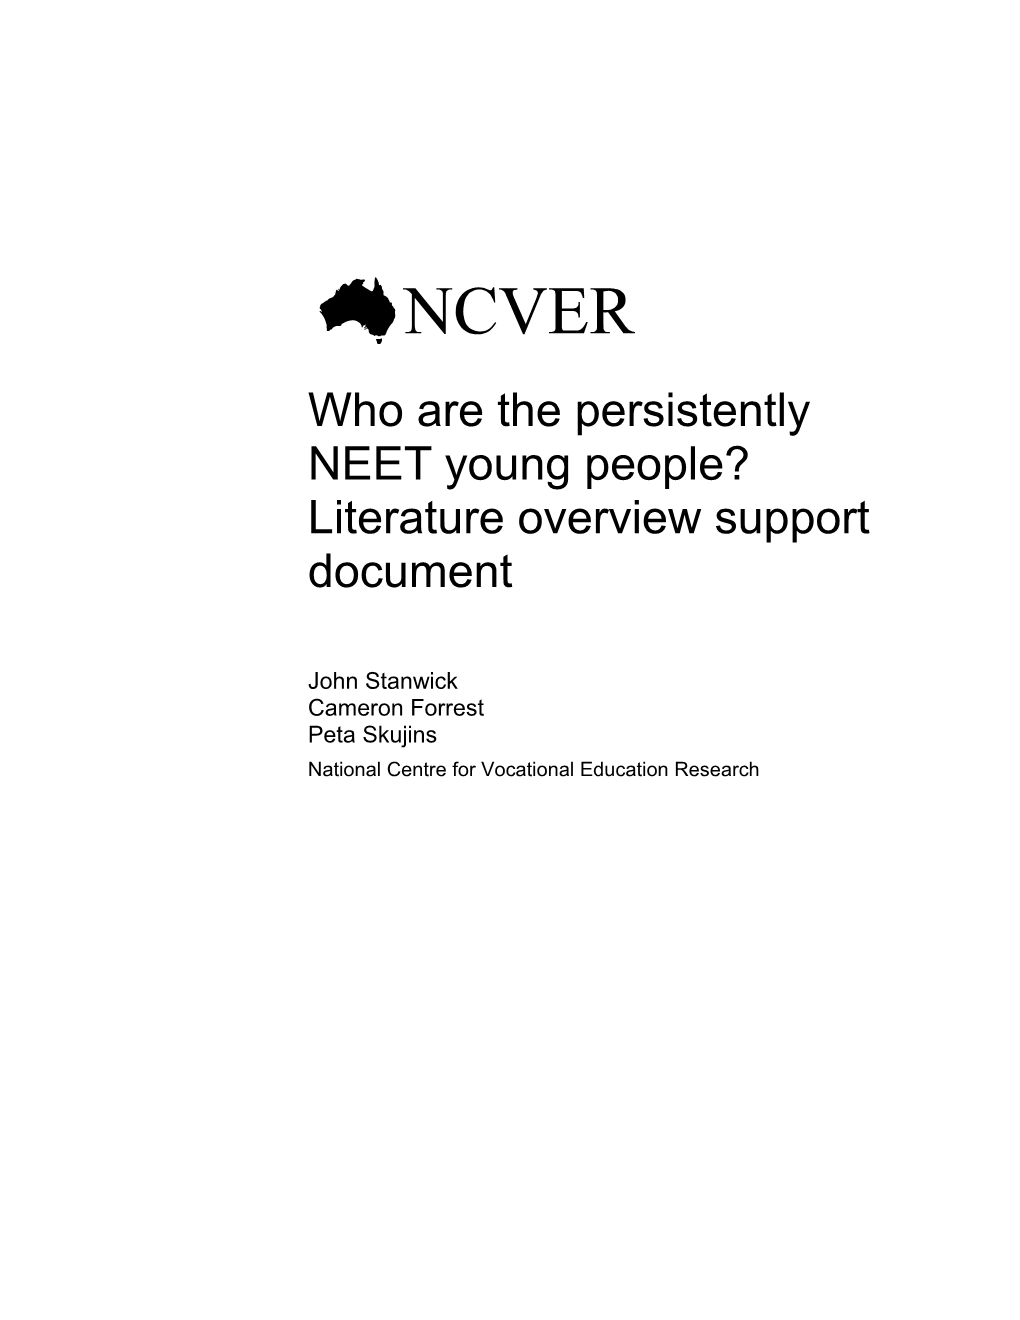 Who Are the Persistently NEET Young People?Literature Overview Support Document